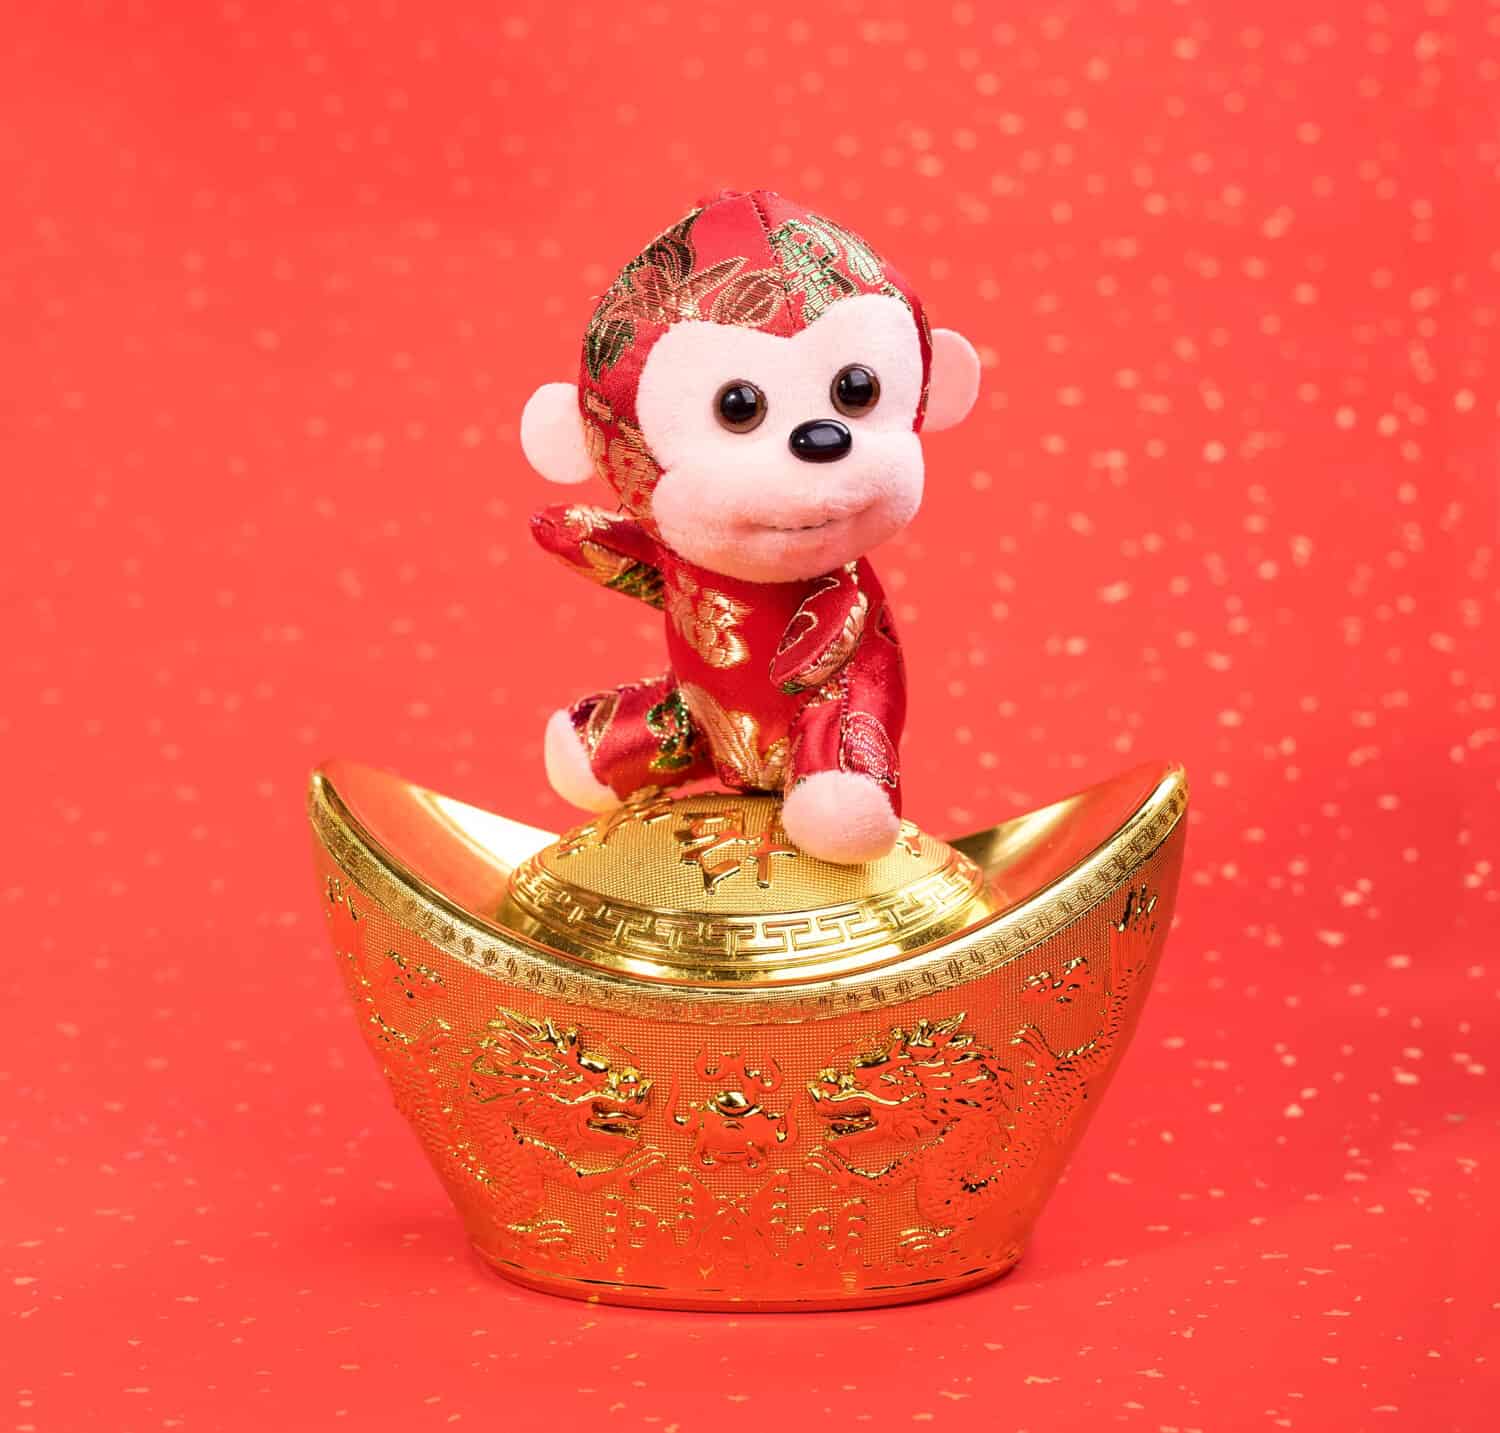 chinese monkey toy on red background